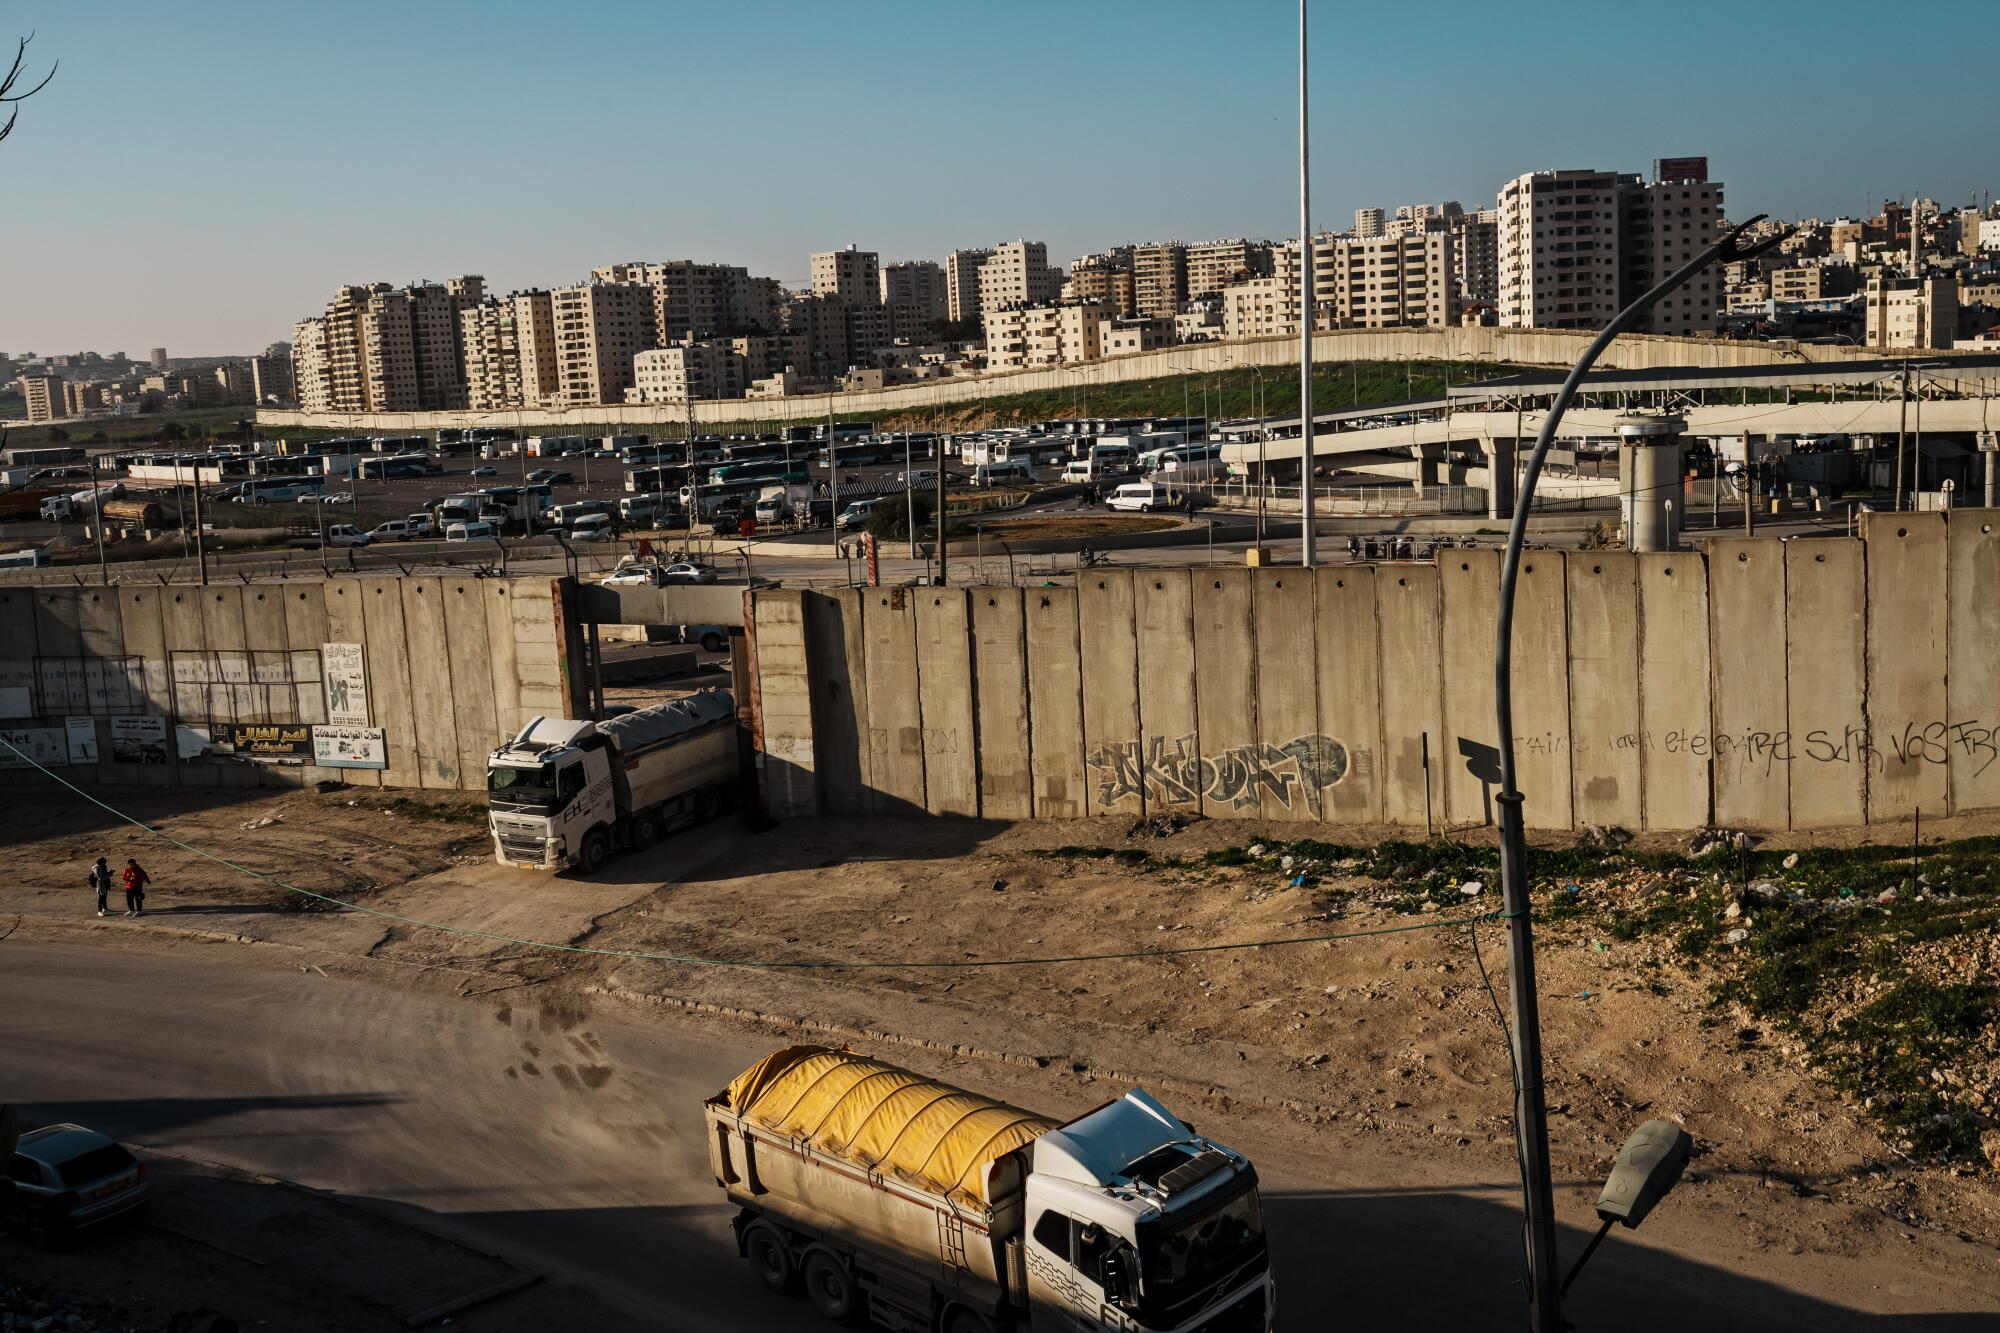 Commercial trucks move along at rush hour onto the thoroughfare highway 60, near the Qalandiya check point.